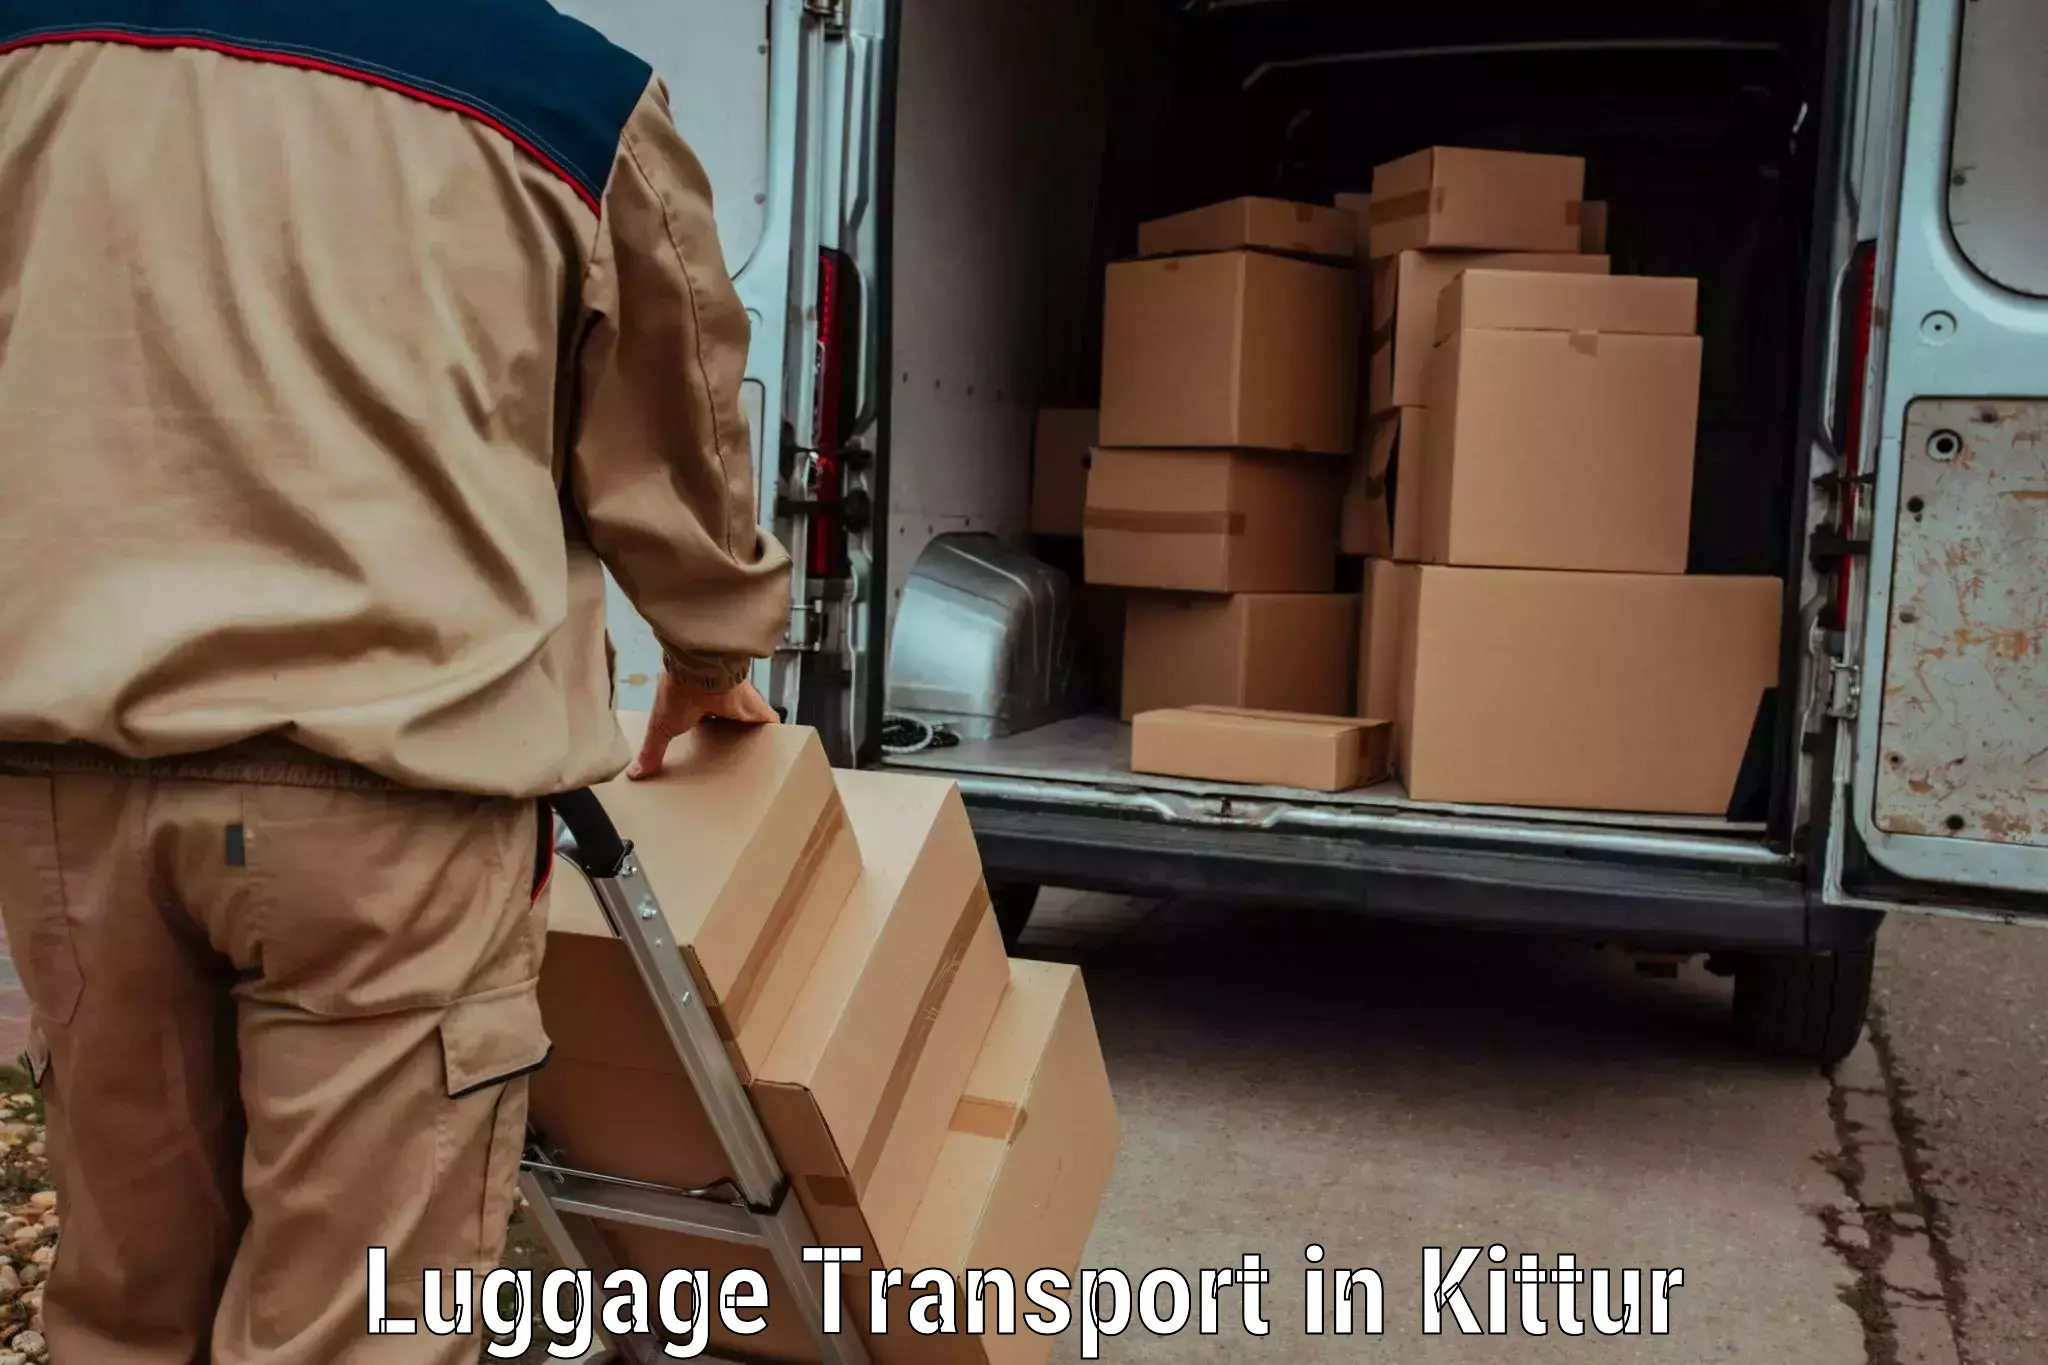 Luggage transport consulting in Kittur